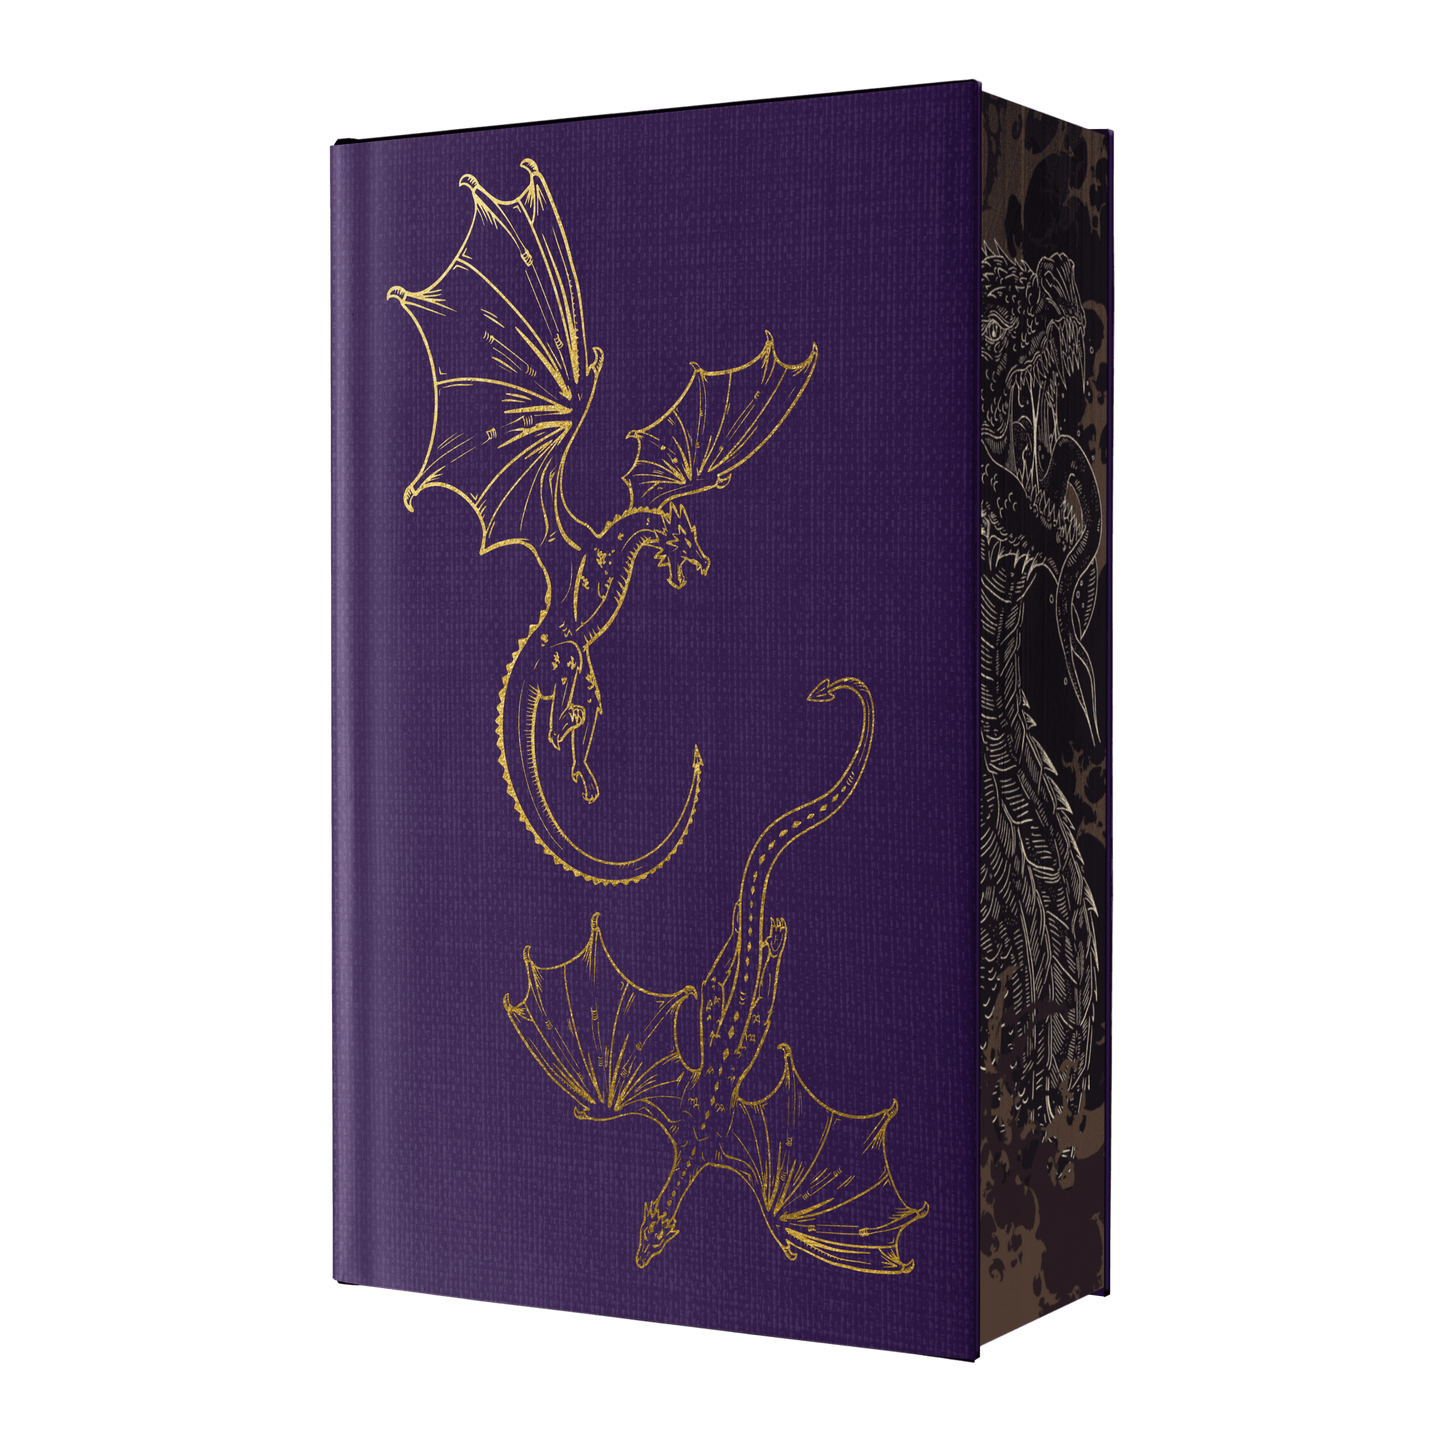 A Time Of Dragons - Indie Endless Edition (2nd Printing)